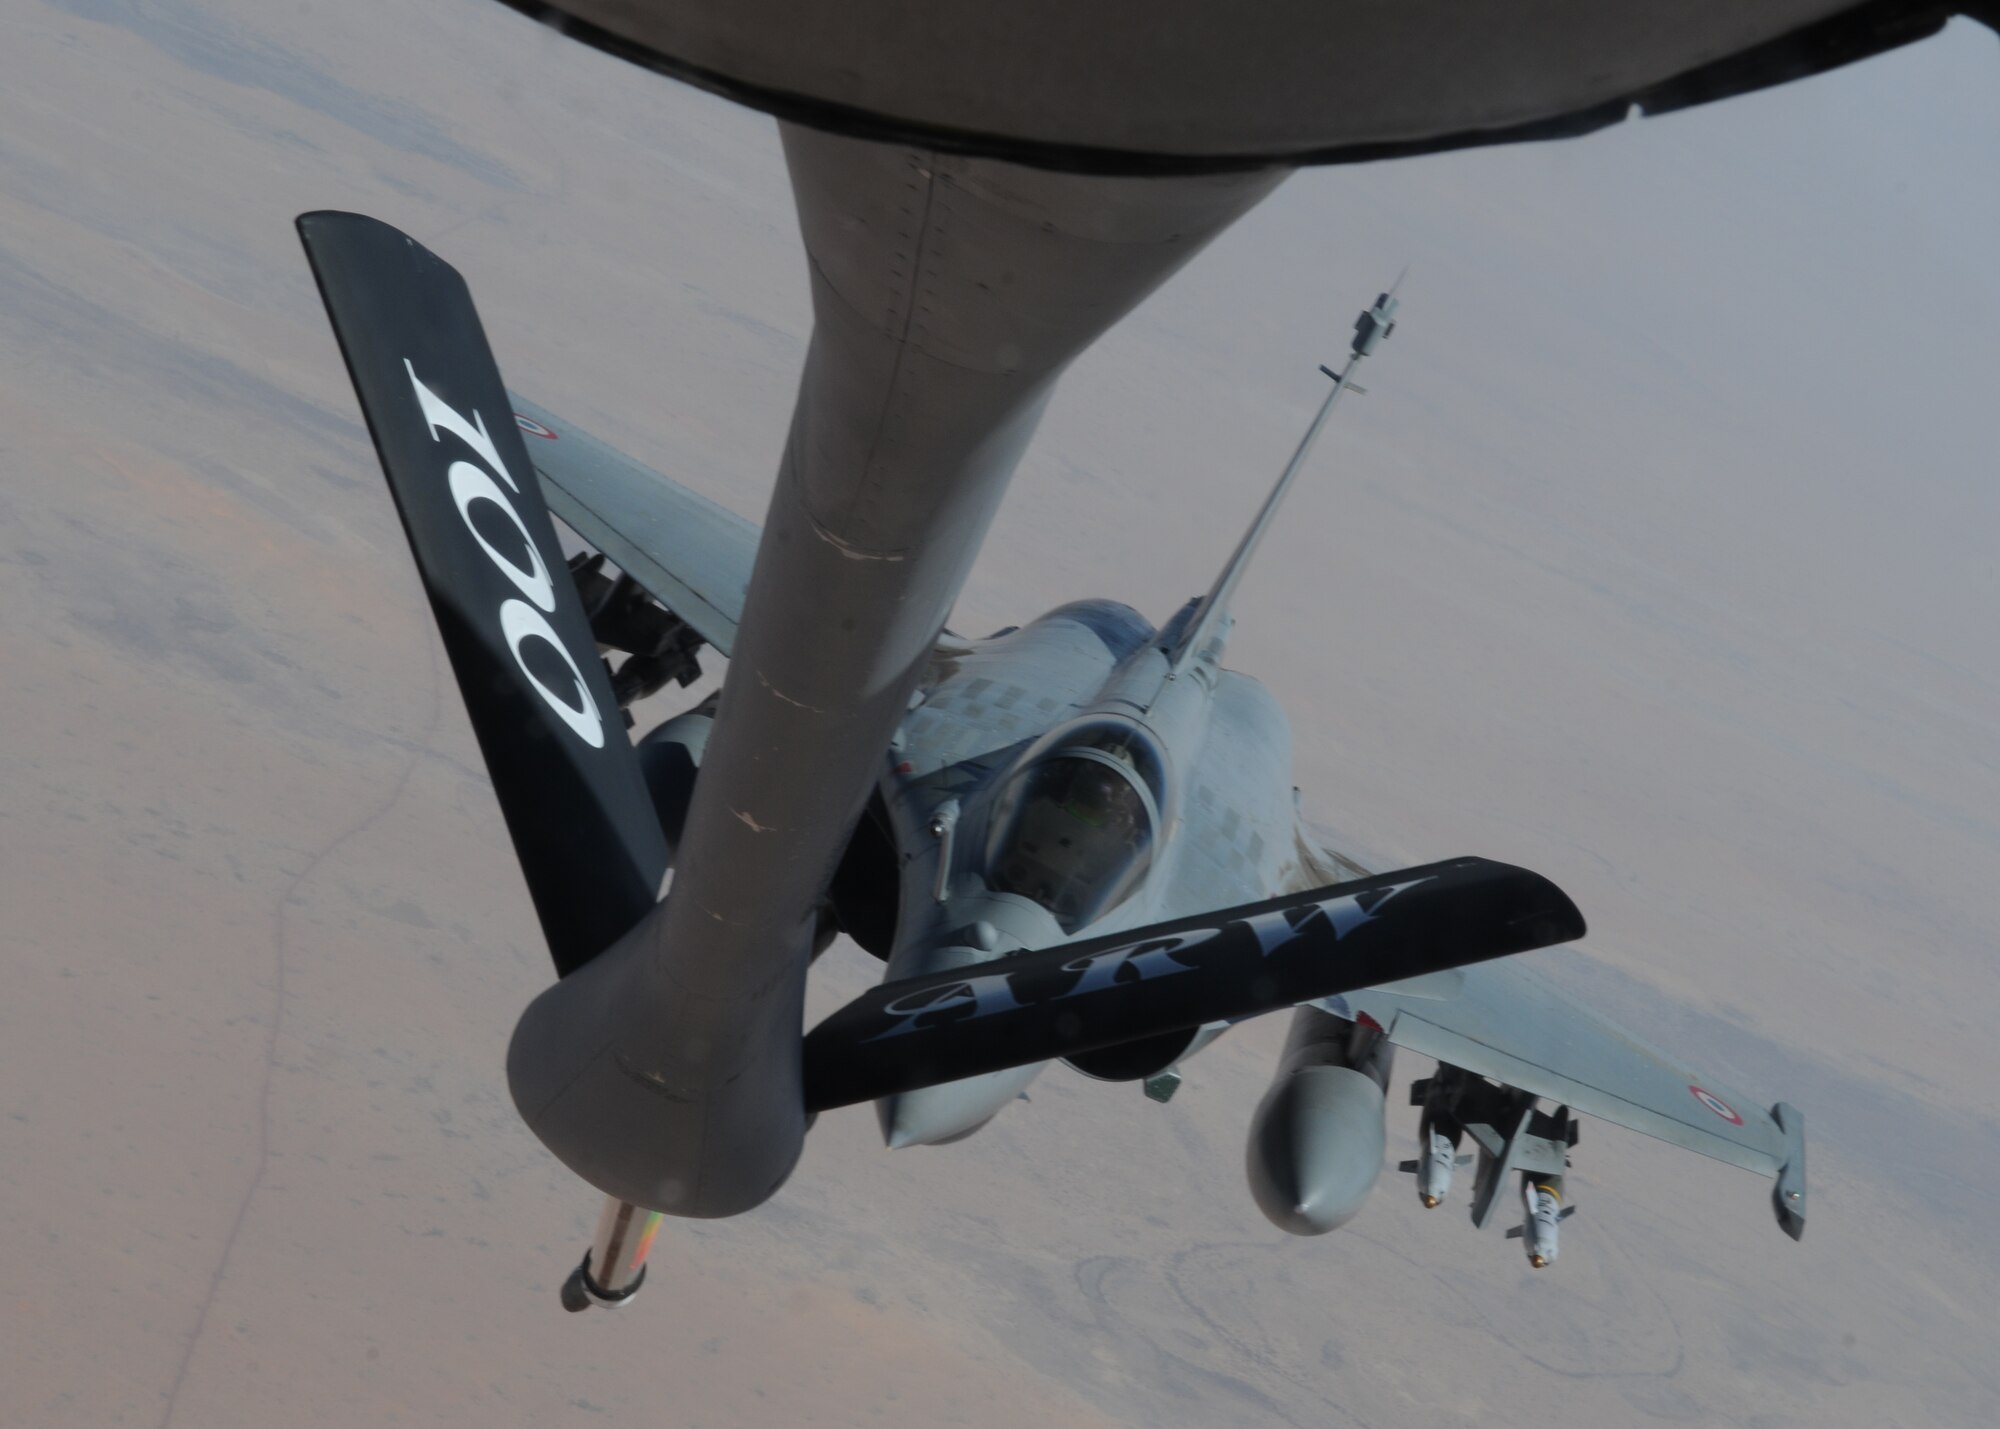 A French Rafale fighter aircraft refuels with a KC-135 Stratotanker April 23, 2013, over Mali. The Stratotankers, from the 100th Air Refueling Wing at RAF Mildenhall, England, have been providing air-to-air refueling for the French since Jan. 27, 2013, and are currently being operated by the 100th’s forward deployed unit, the 351st Expeditionary Air Refueling Squadron. (U.S. Air Force photo by 1st Lt. Christopher Mesnard/Released)